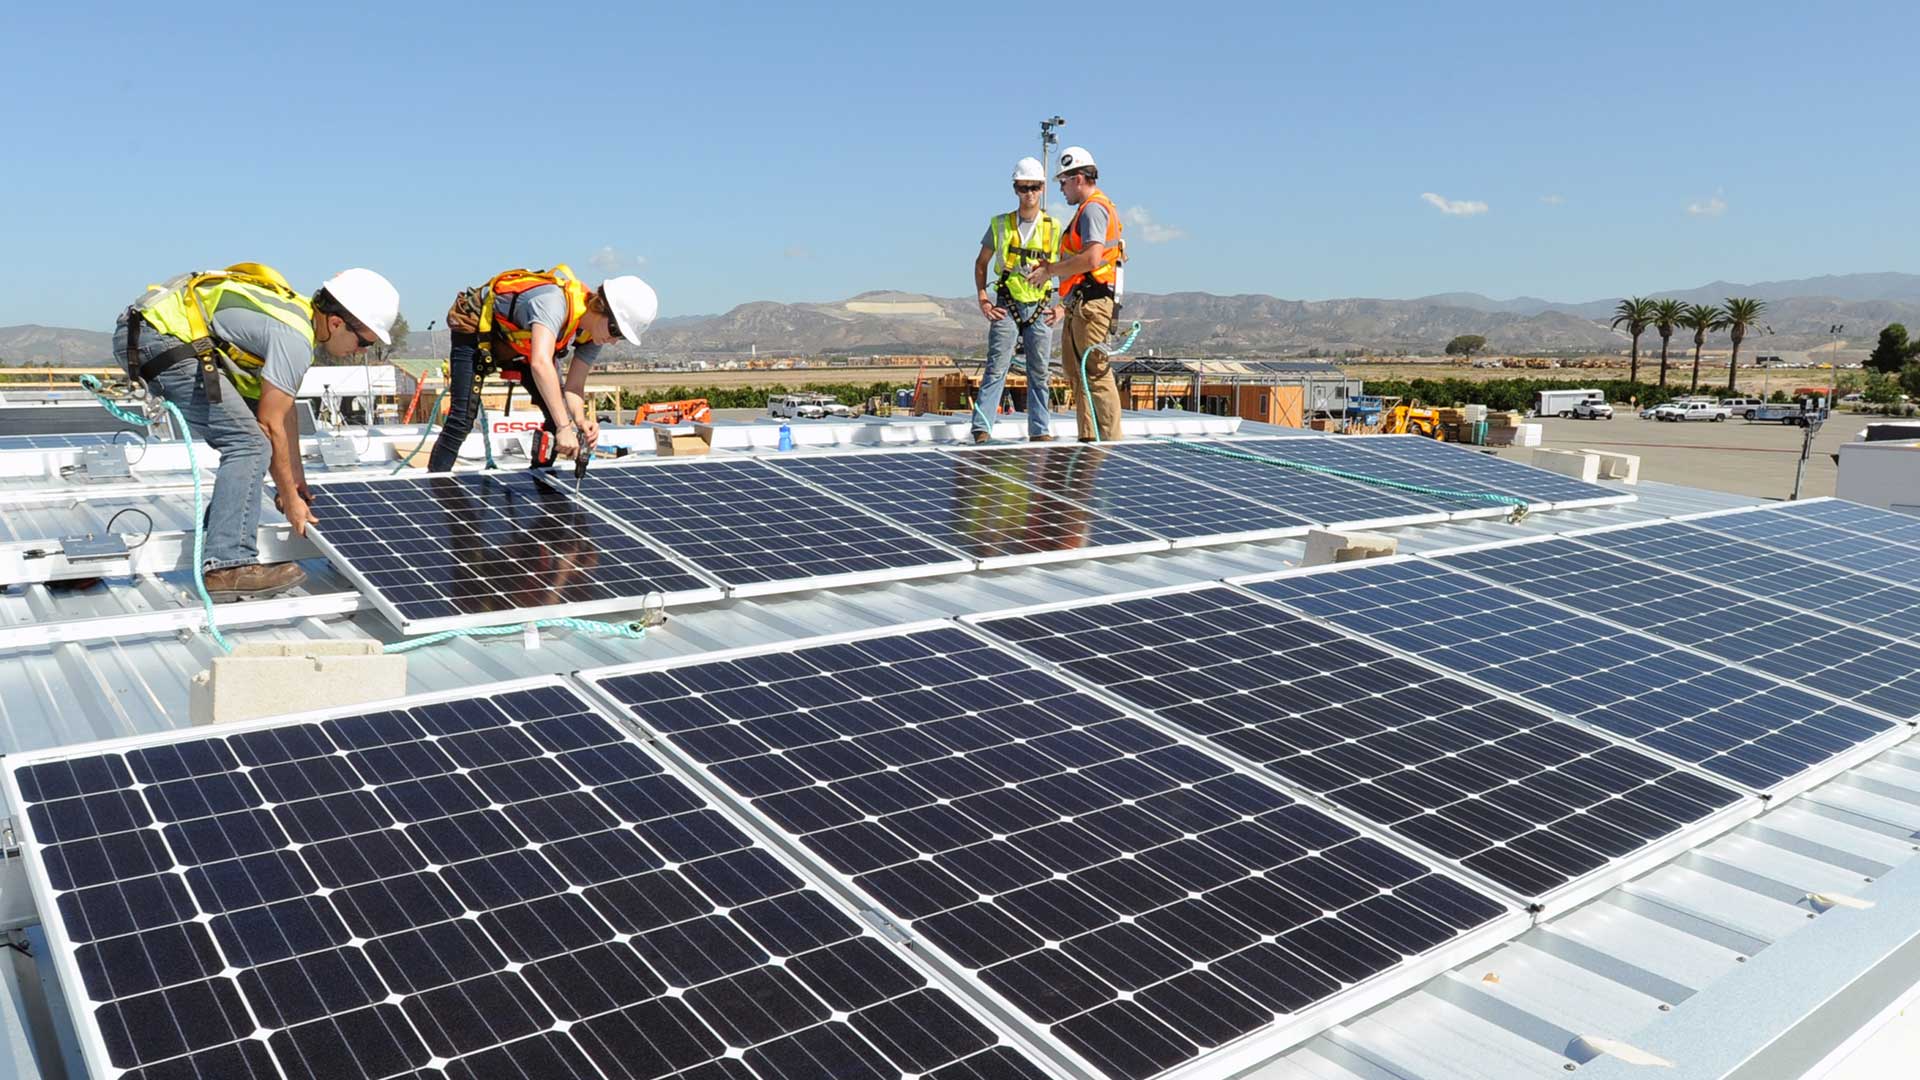 Can California Really Go 100 Percent Renewable Energy?